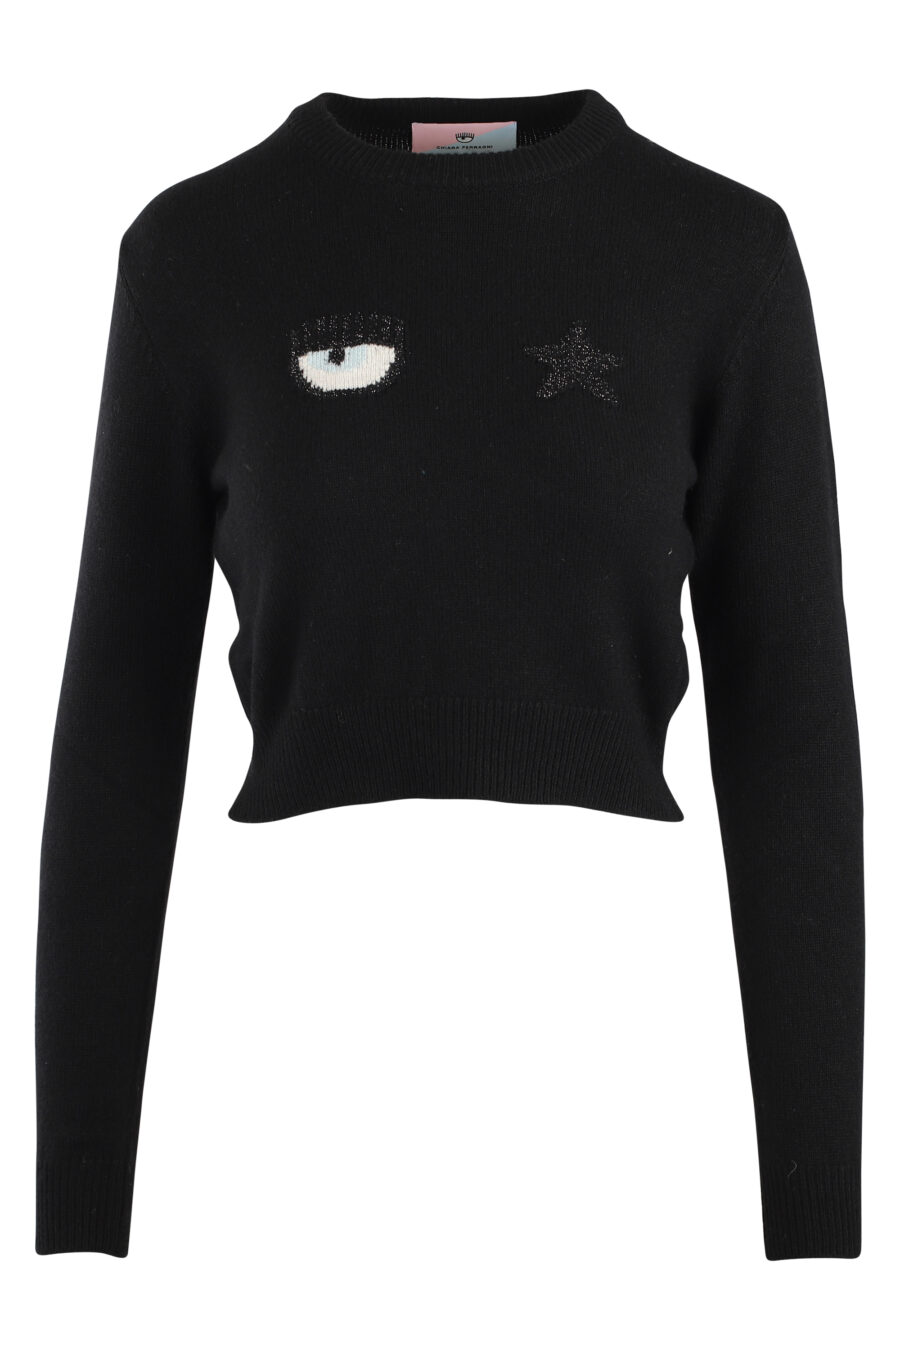 Black jumper with eye and star logo - IMG 5527